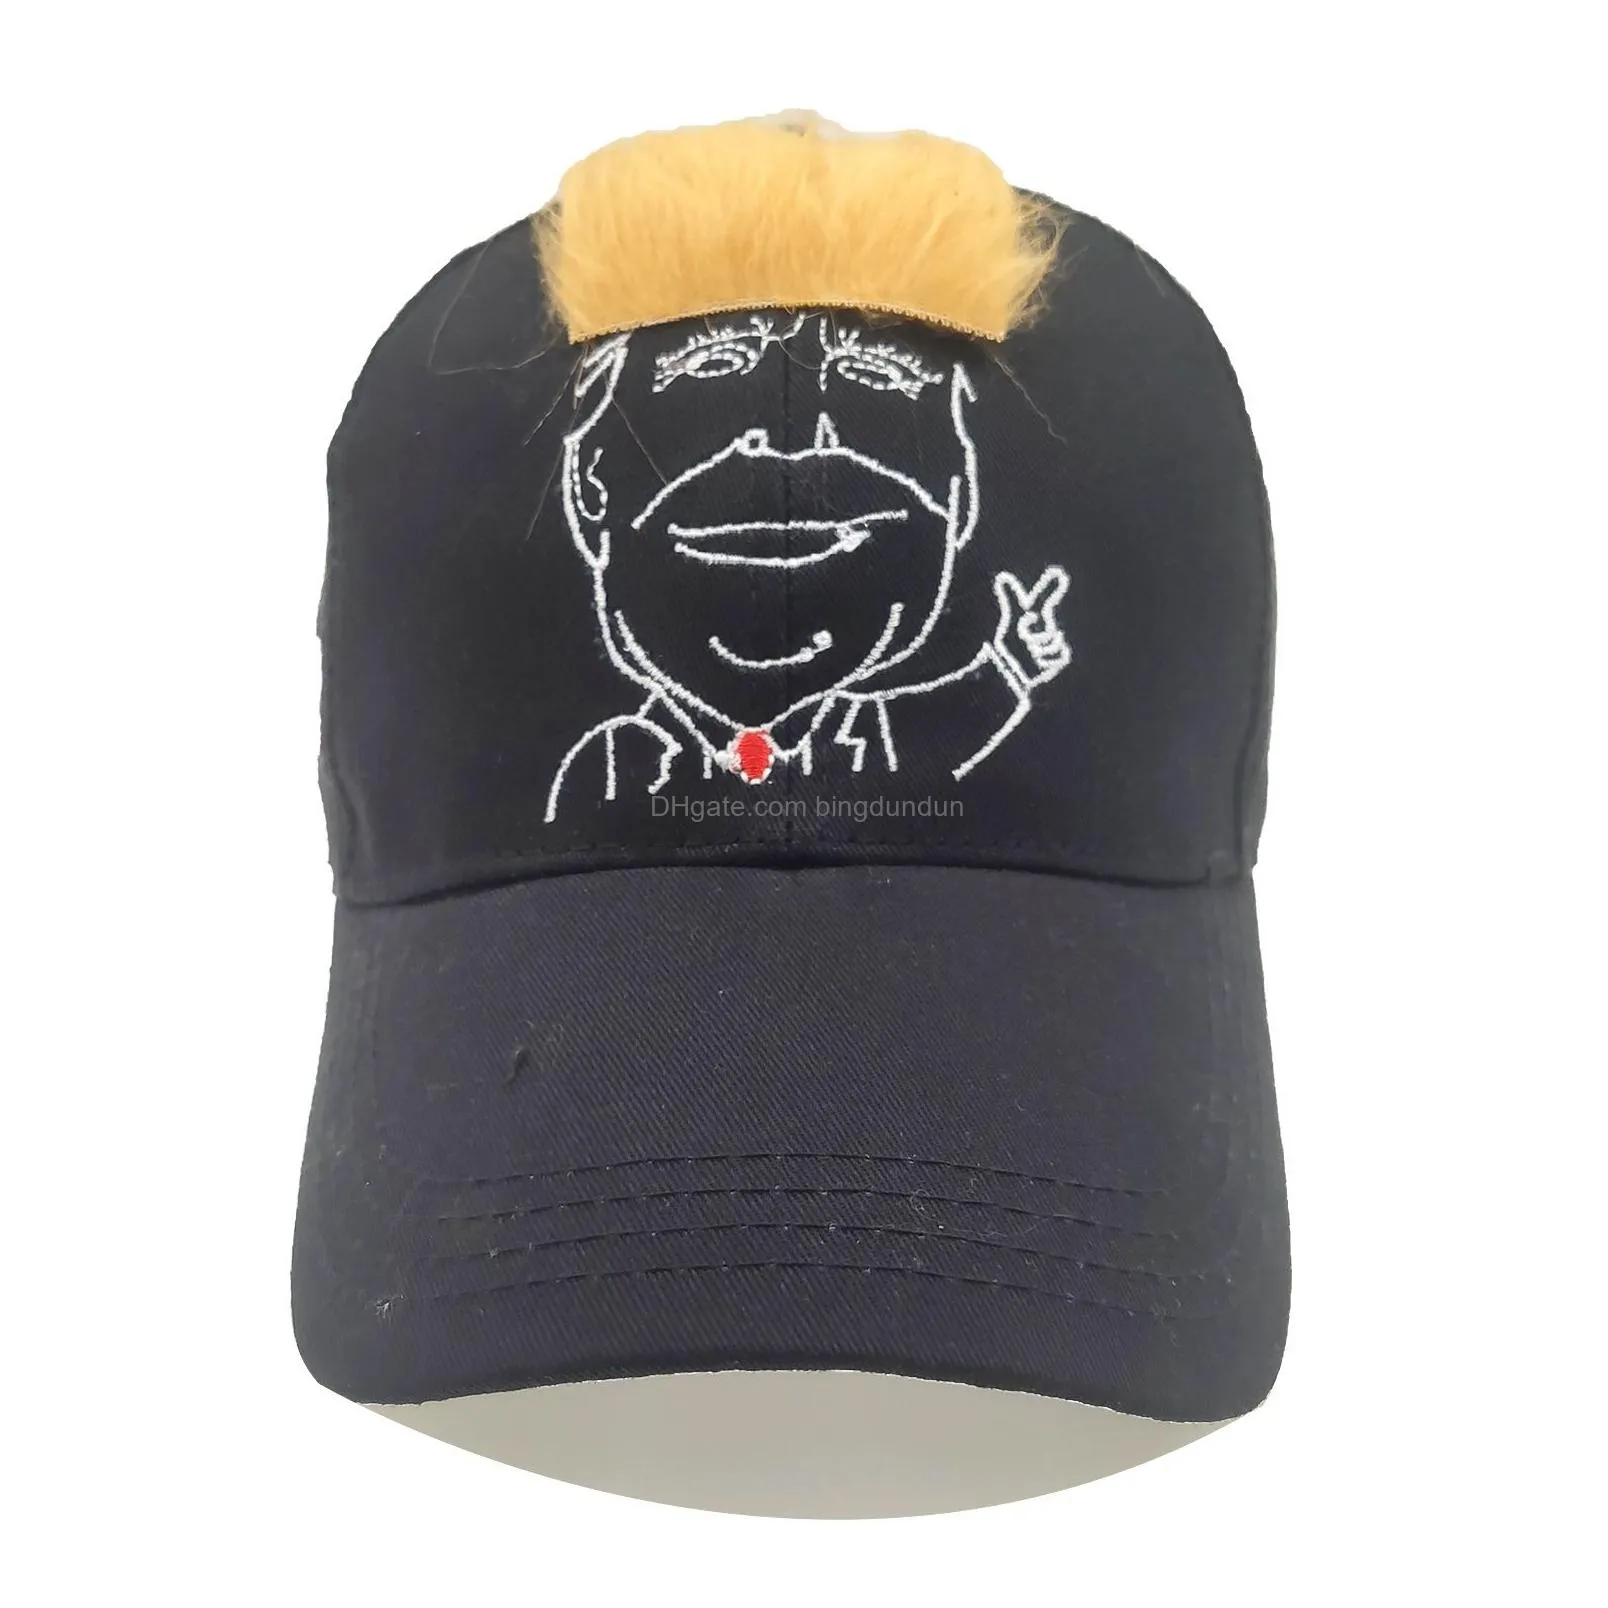 Trump 2024 Embroidery Hat With Hair Baseball Cap Trump Supporter Rally Parade Cotton Hats